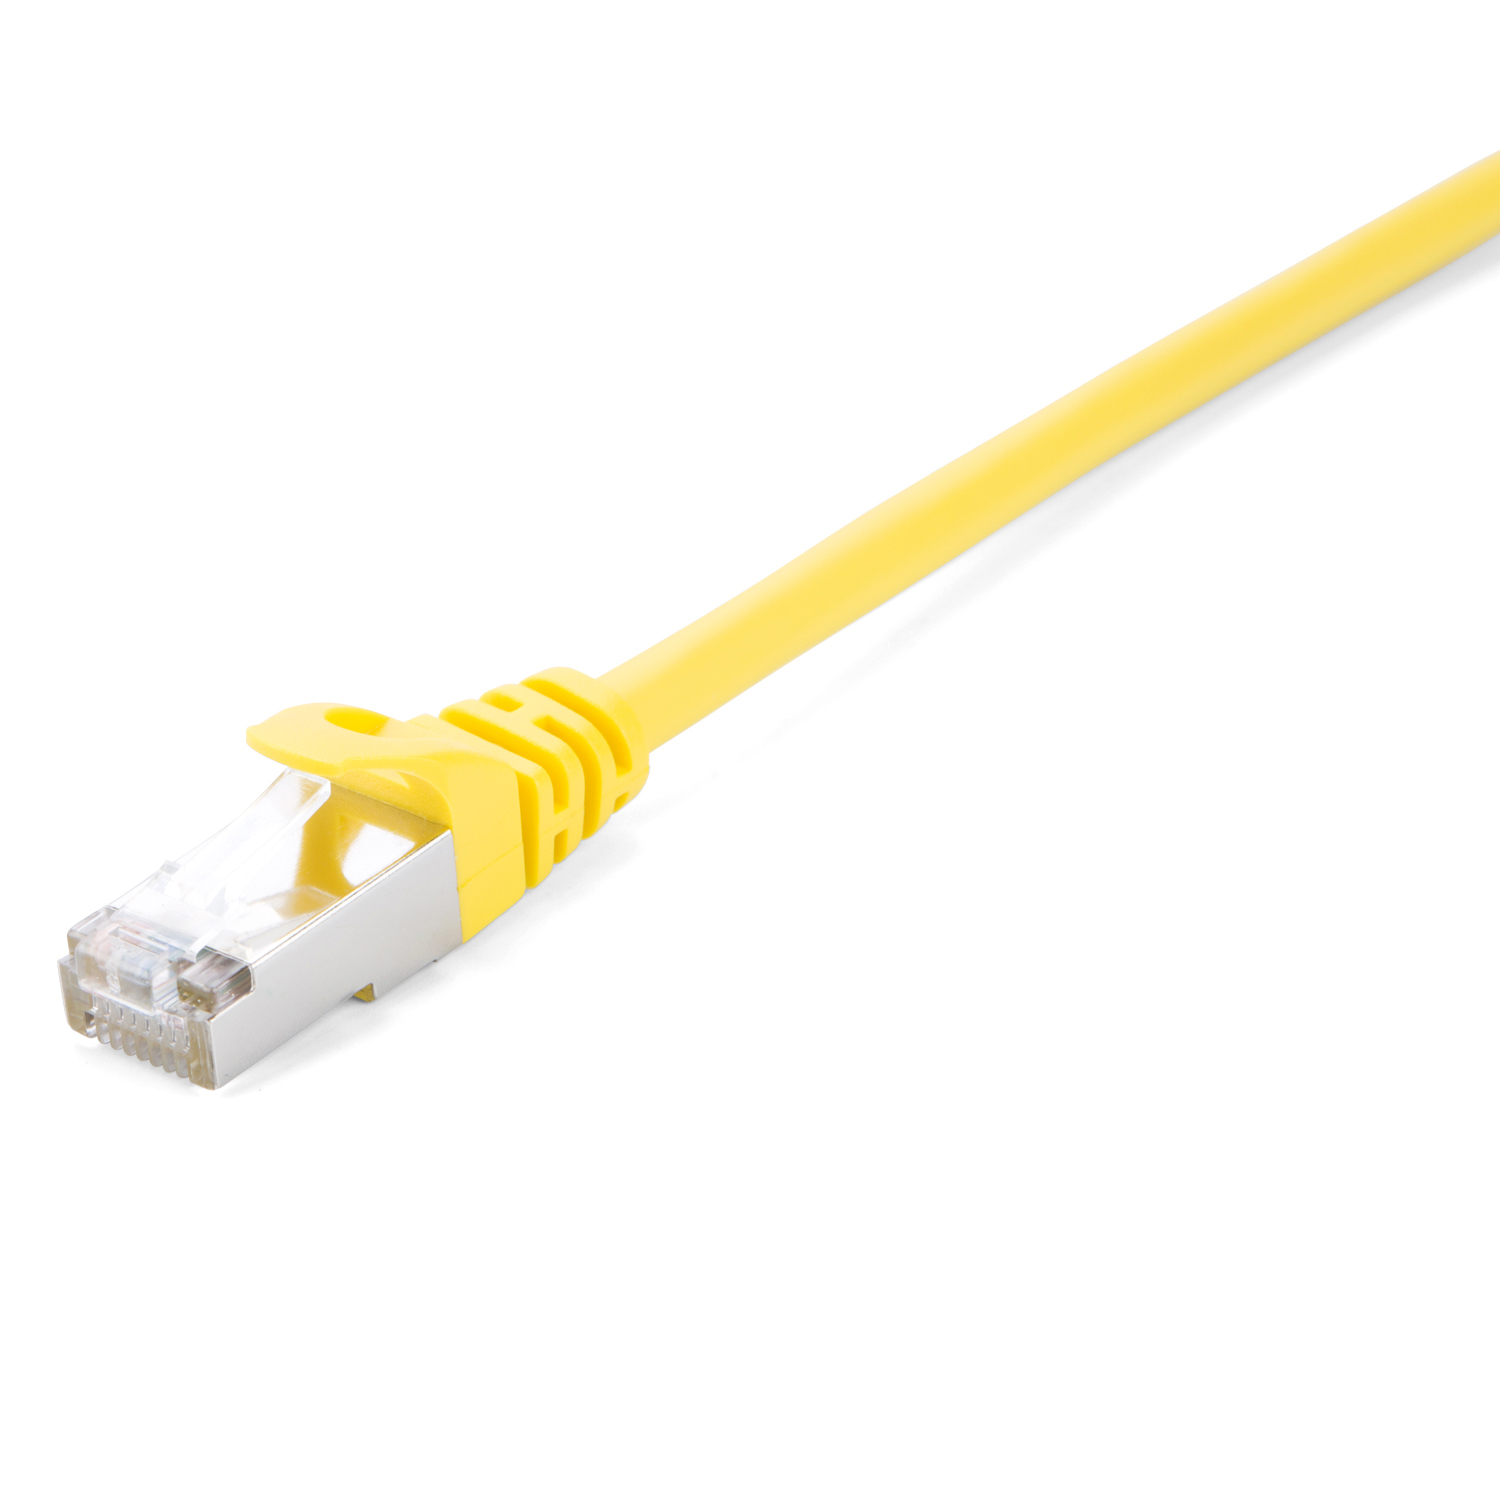 Photos - Cable (video, audio, USB) V7 CAT6 Ethernet Shielded STP 03M Yellow V7CAT6STP-03M-YLW-1E 